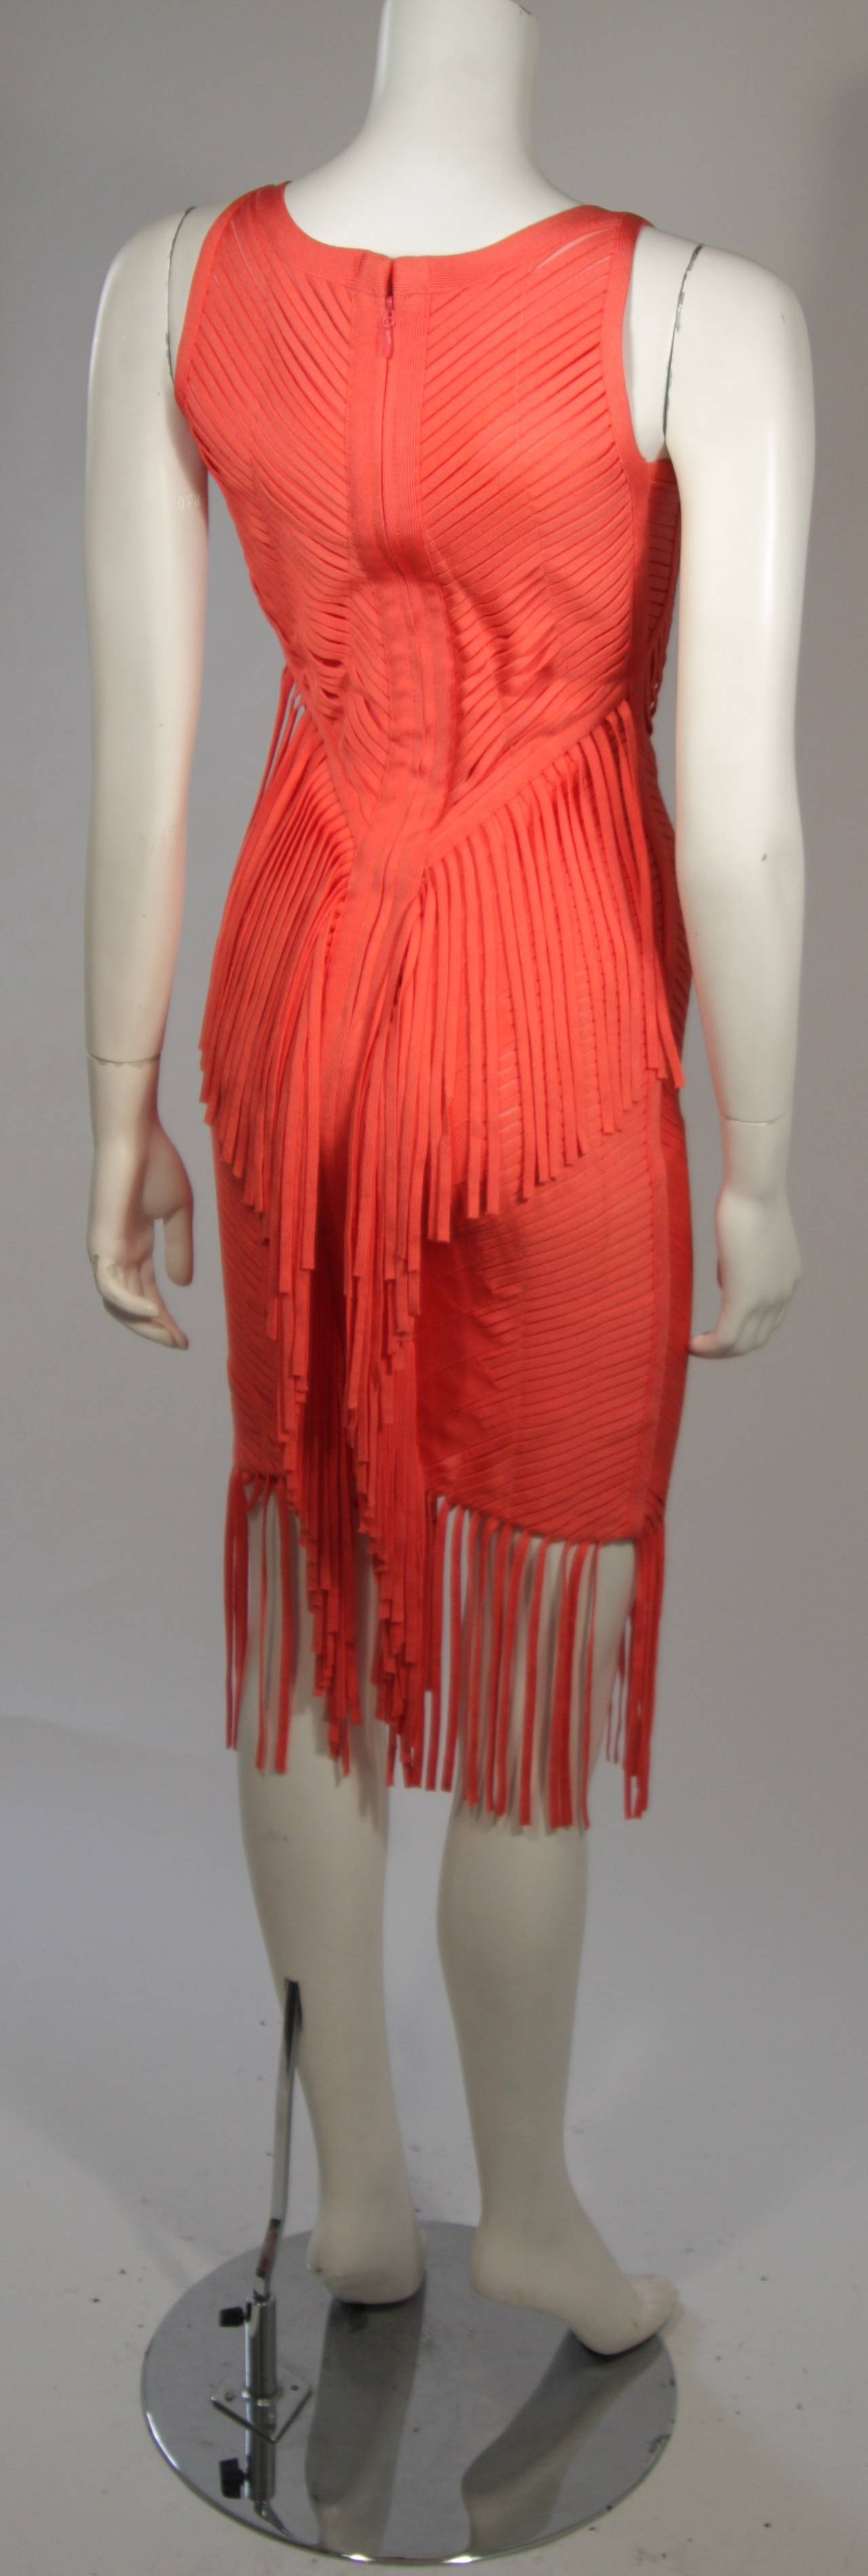 Herve Leger Orange Fringed Bodycon Dress Size XS In Excellent Condition For Sale In Los Angeles, CA